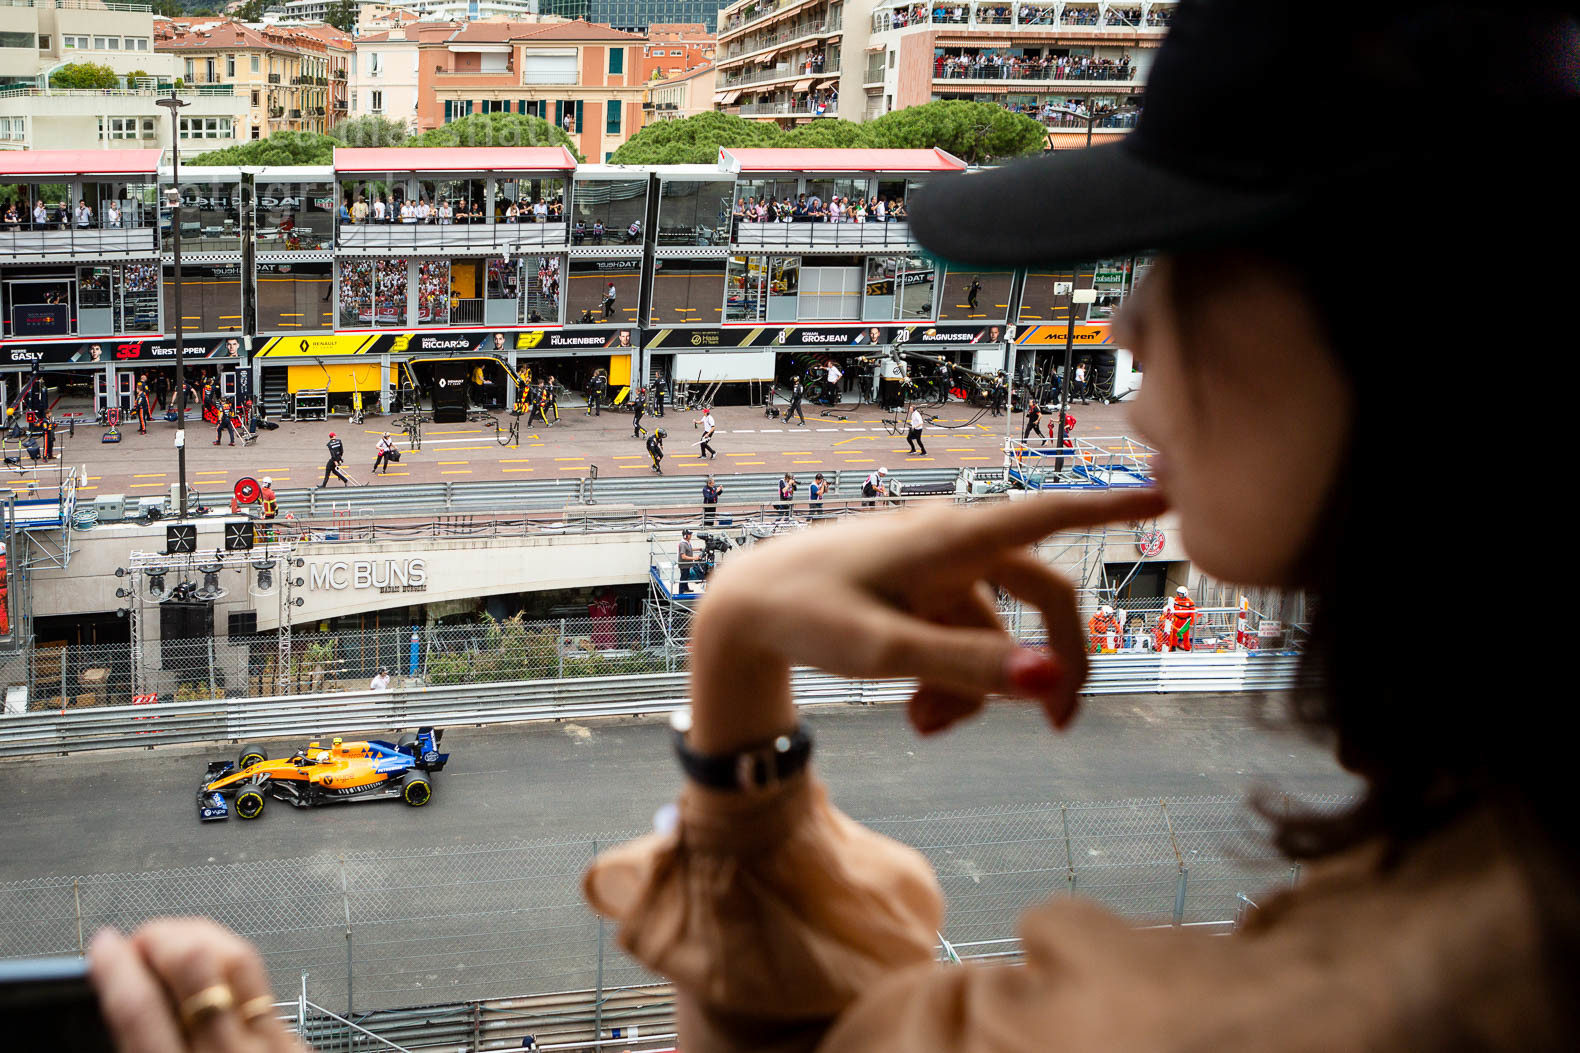 Unidentifiable woman in profile watching the Monaco Grand Prix from a high viewpoint